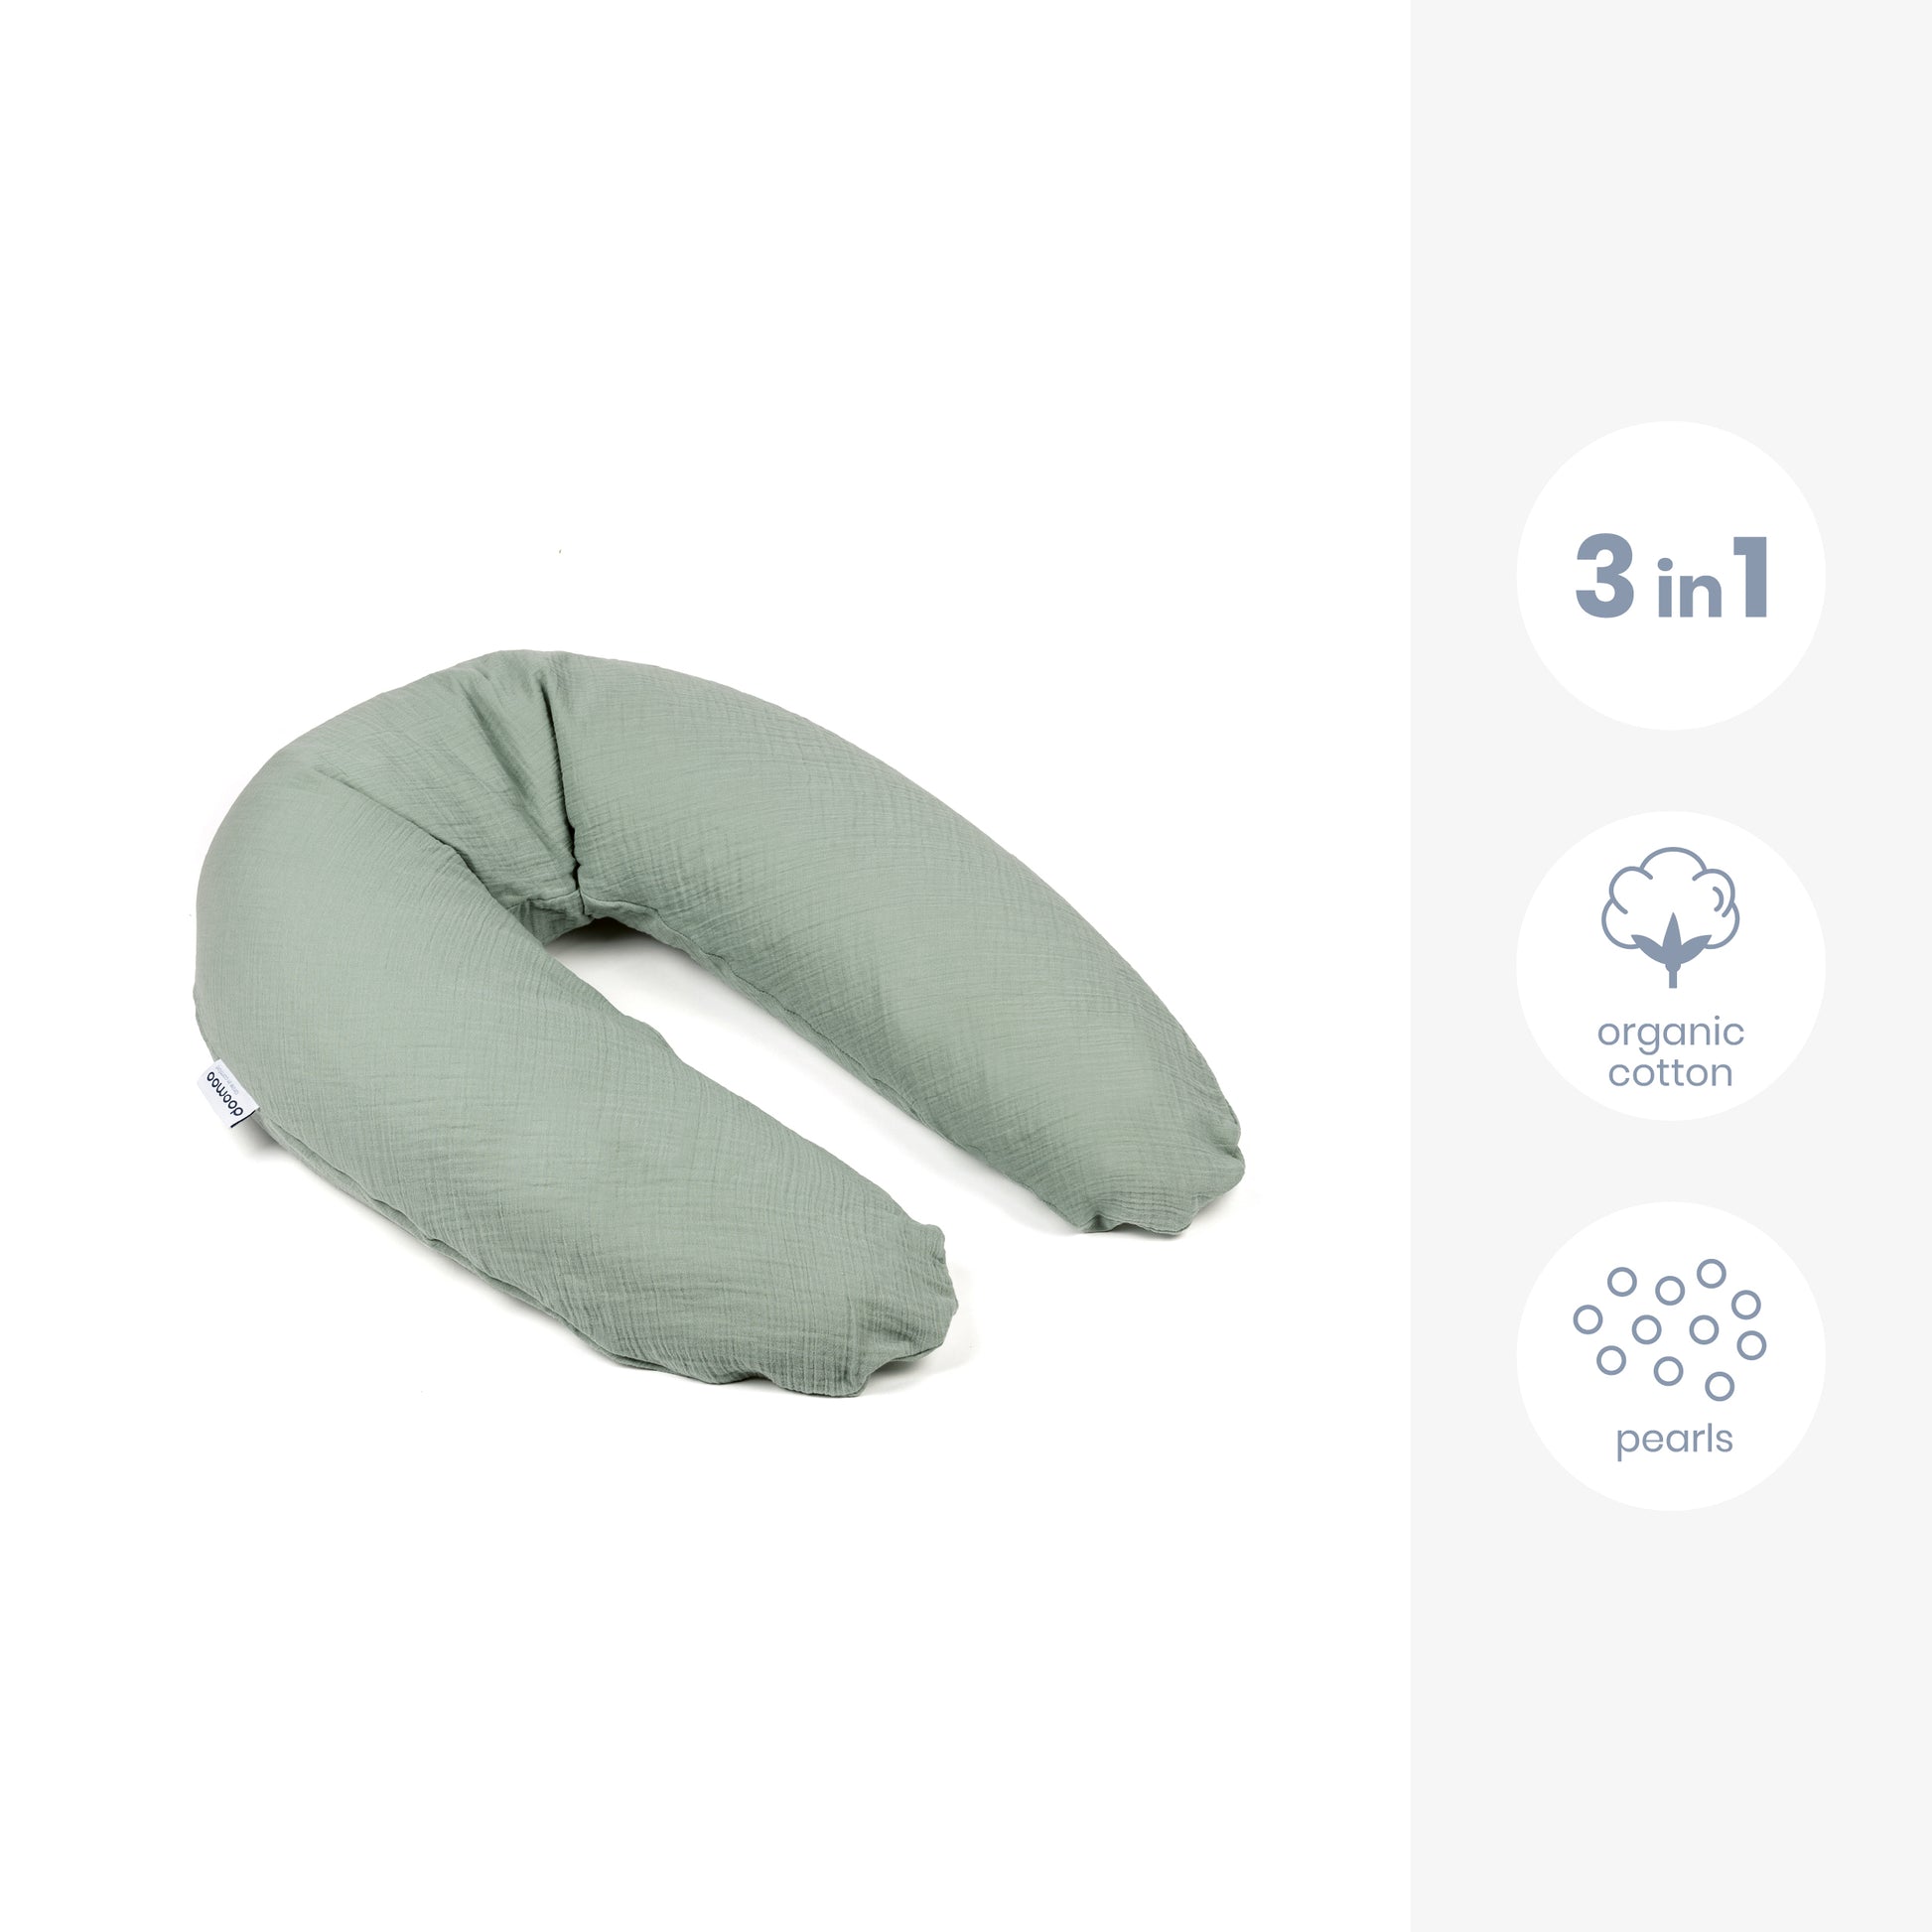 Large Green pregnancy and breastfeeding pillow